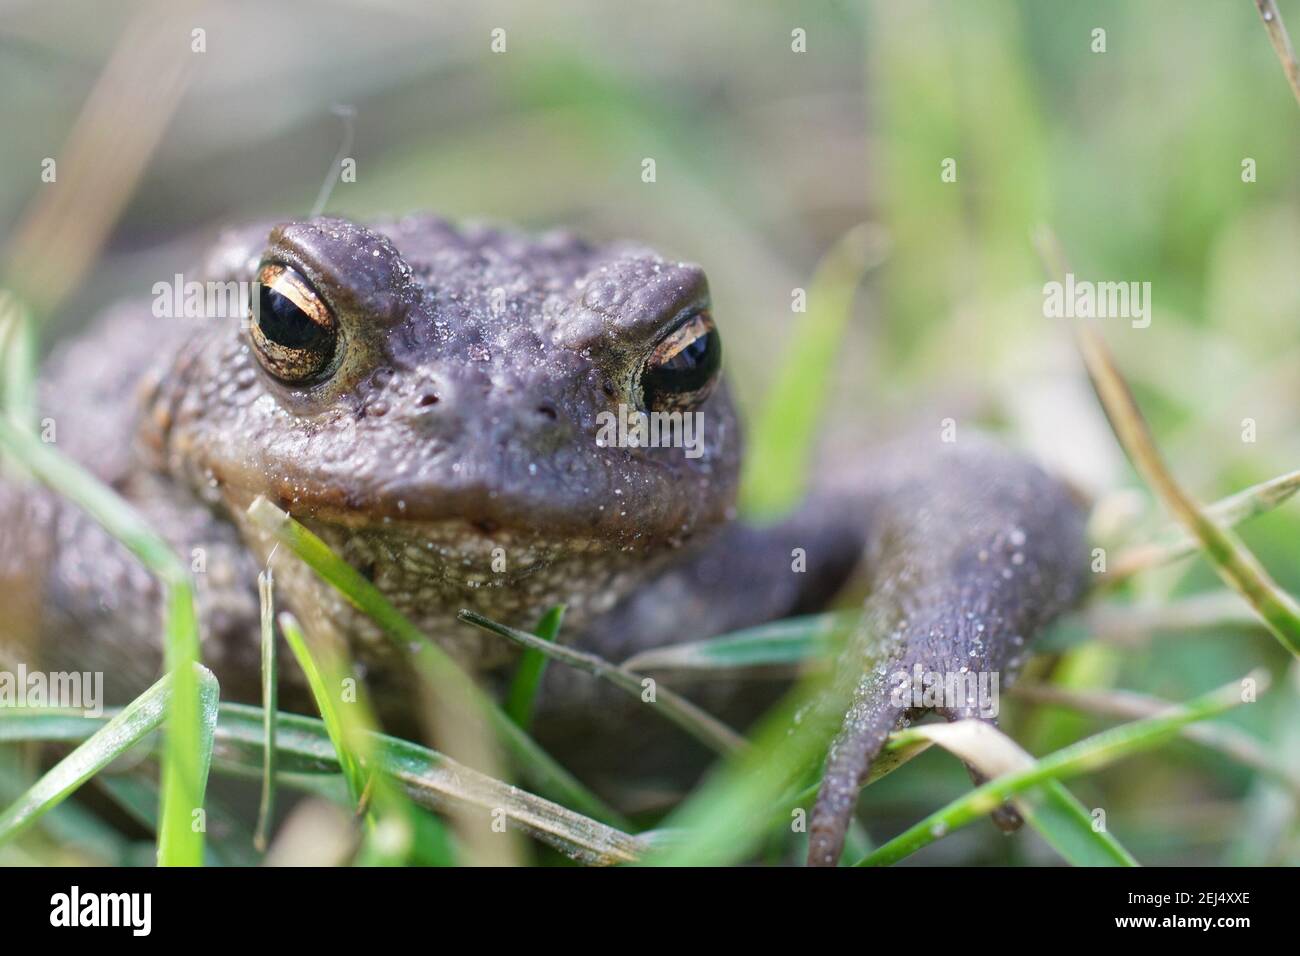 Frontal close up of a male European common toad , Bufo bufo through the grass Stock Photo